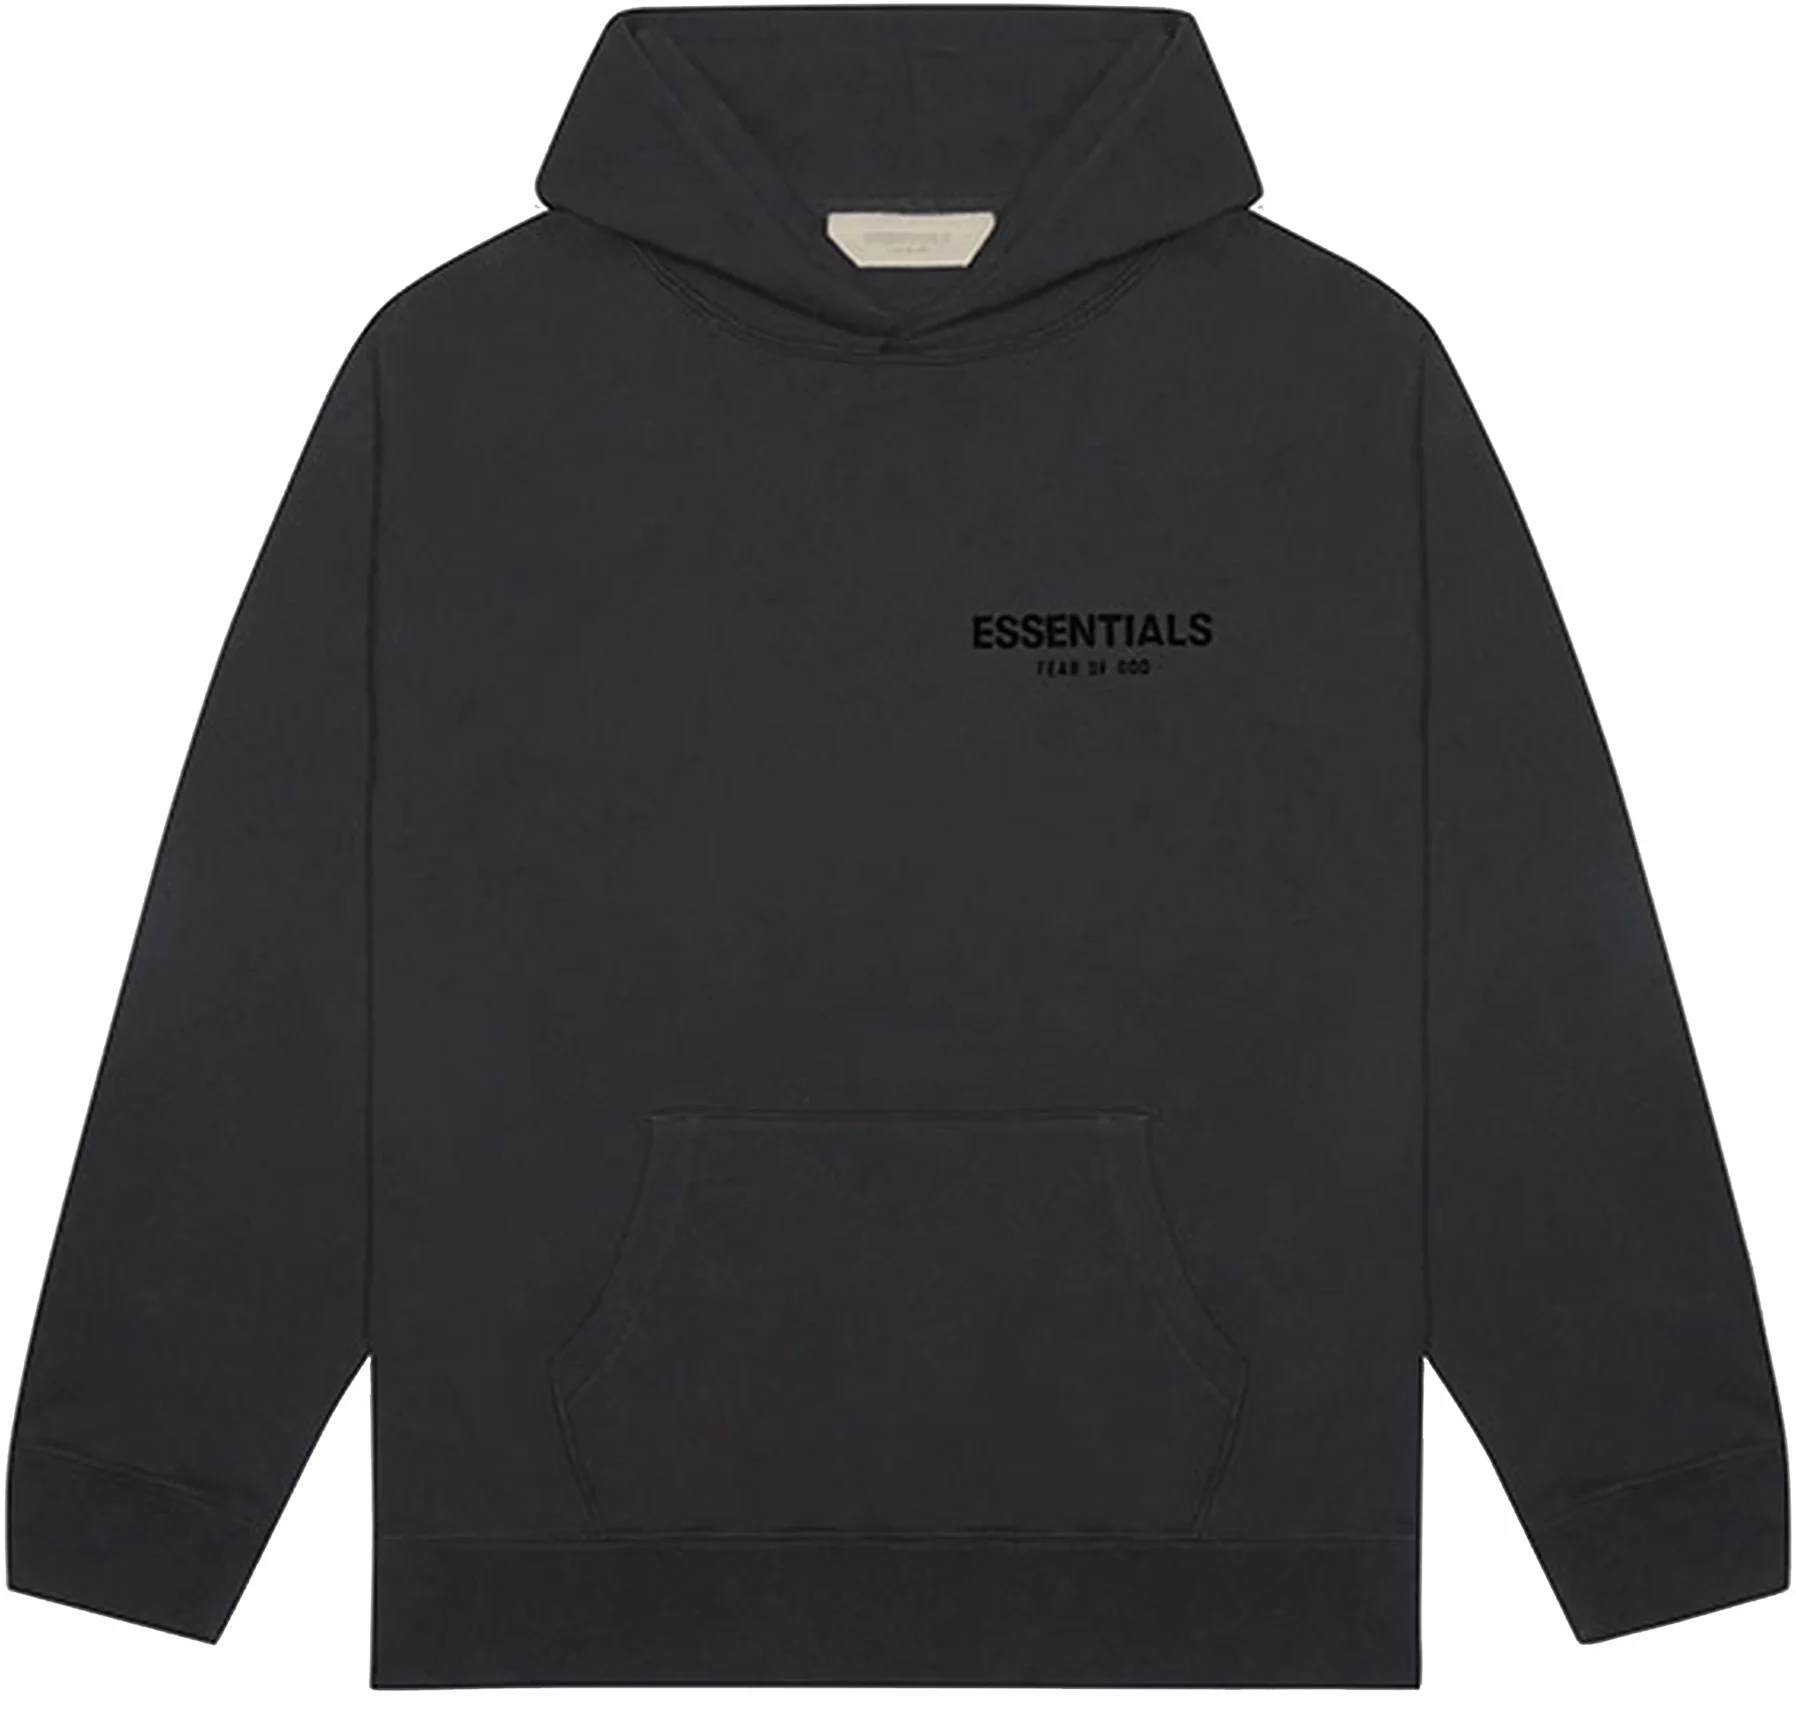 https://images.stockx.com/images/Fear-of-God-Essentials-Pullover-Hoodie-FW22-Stretch-Limo-Black.jpg?fit=fill&bg=FFFFFF&w=1200&h=857&fm=webp&auto=compress&dpr=2&trim=color&updated_at=1672342320&q=60